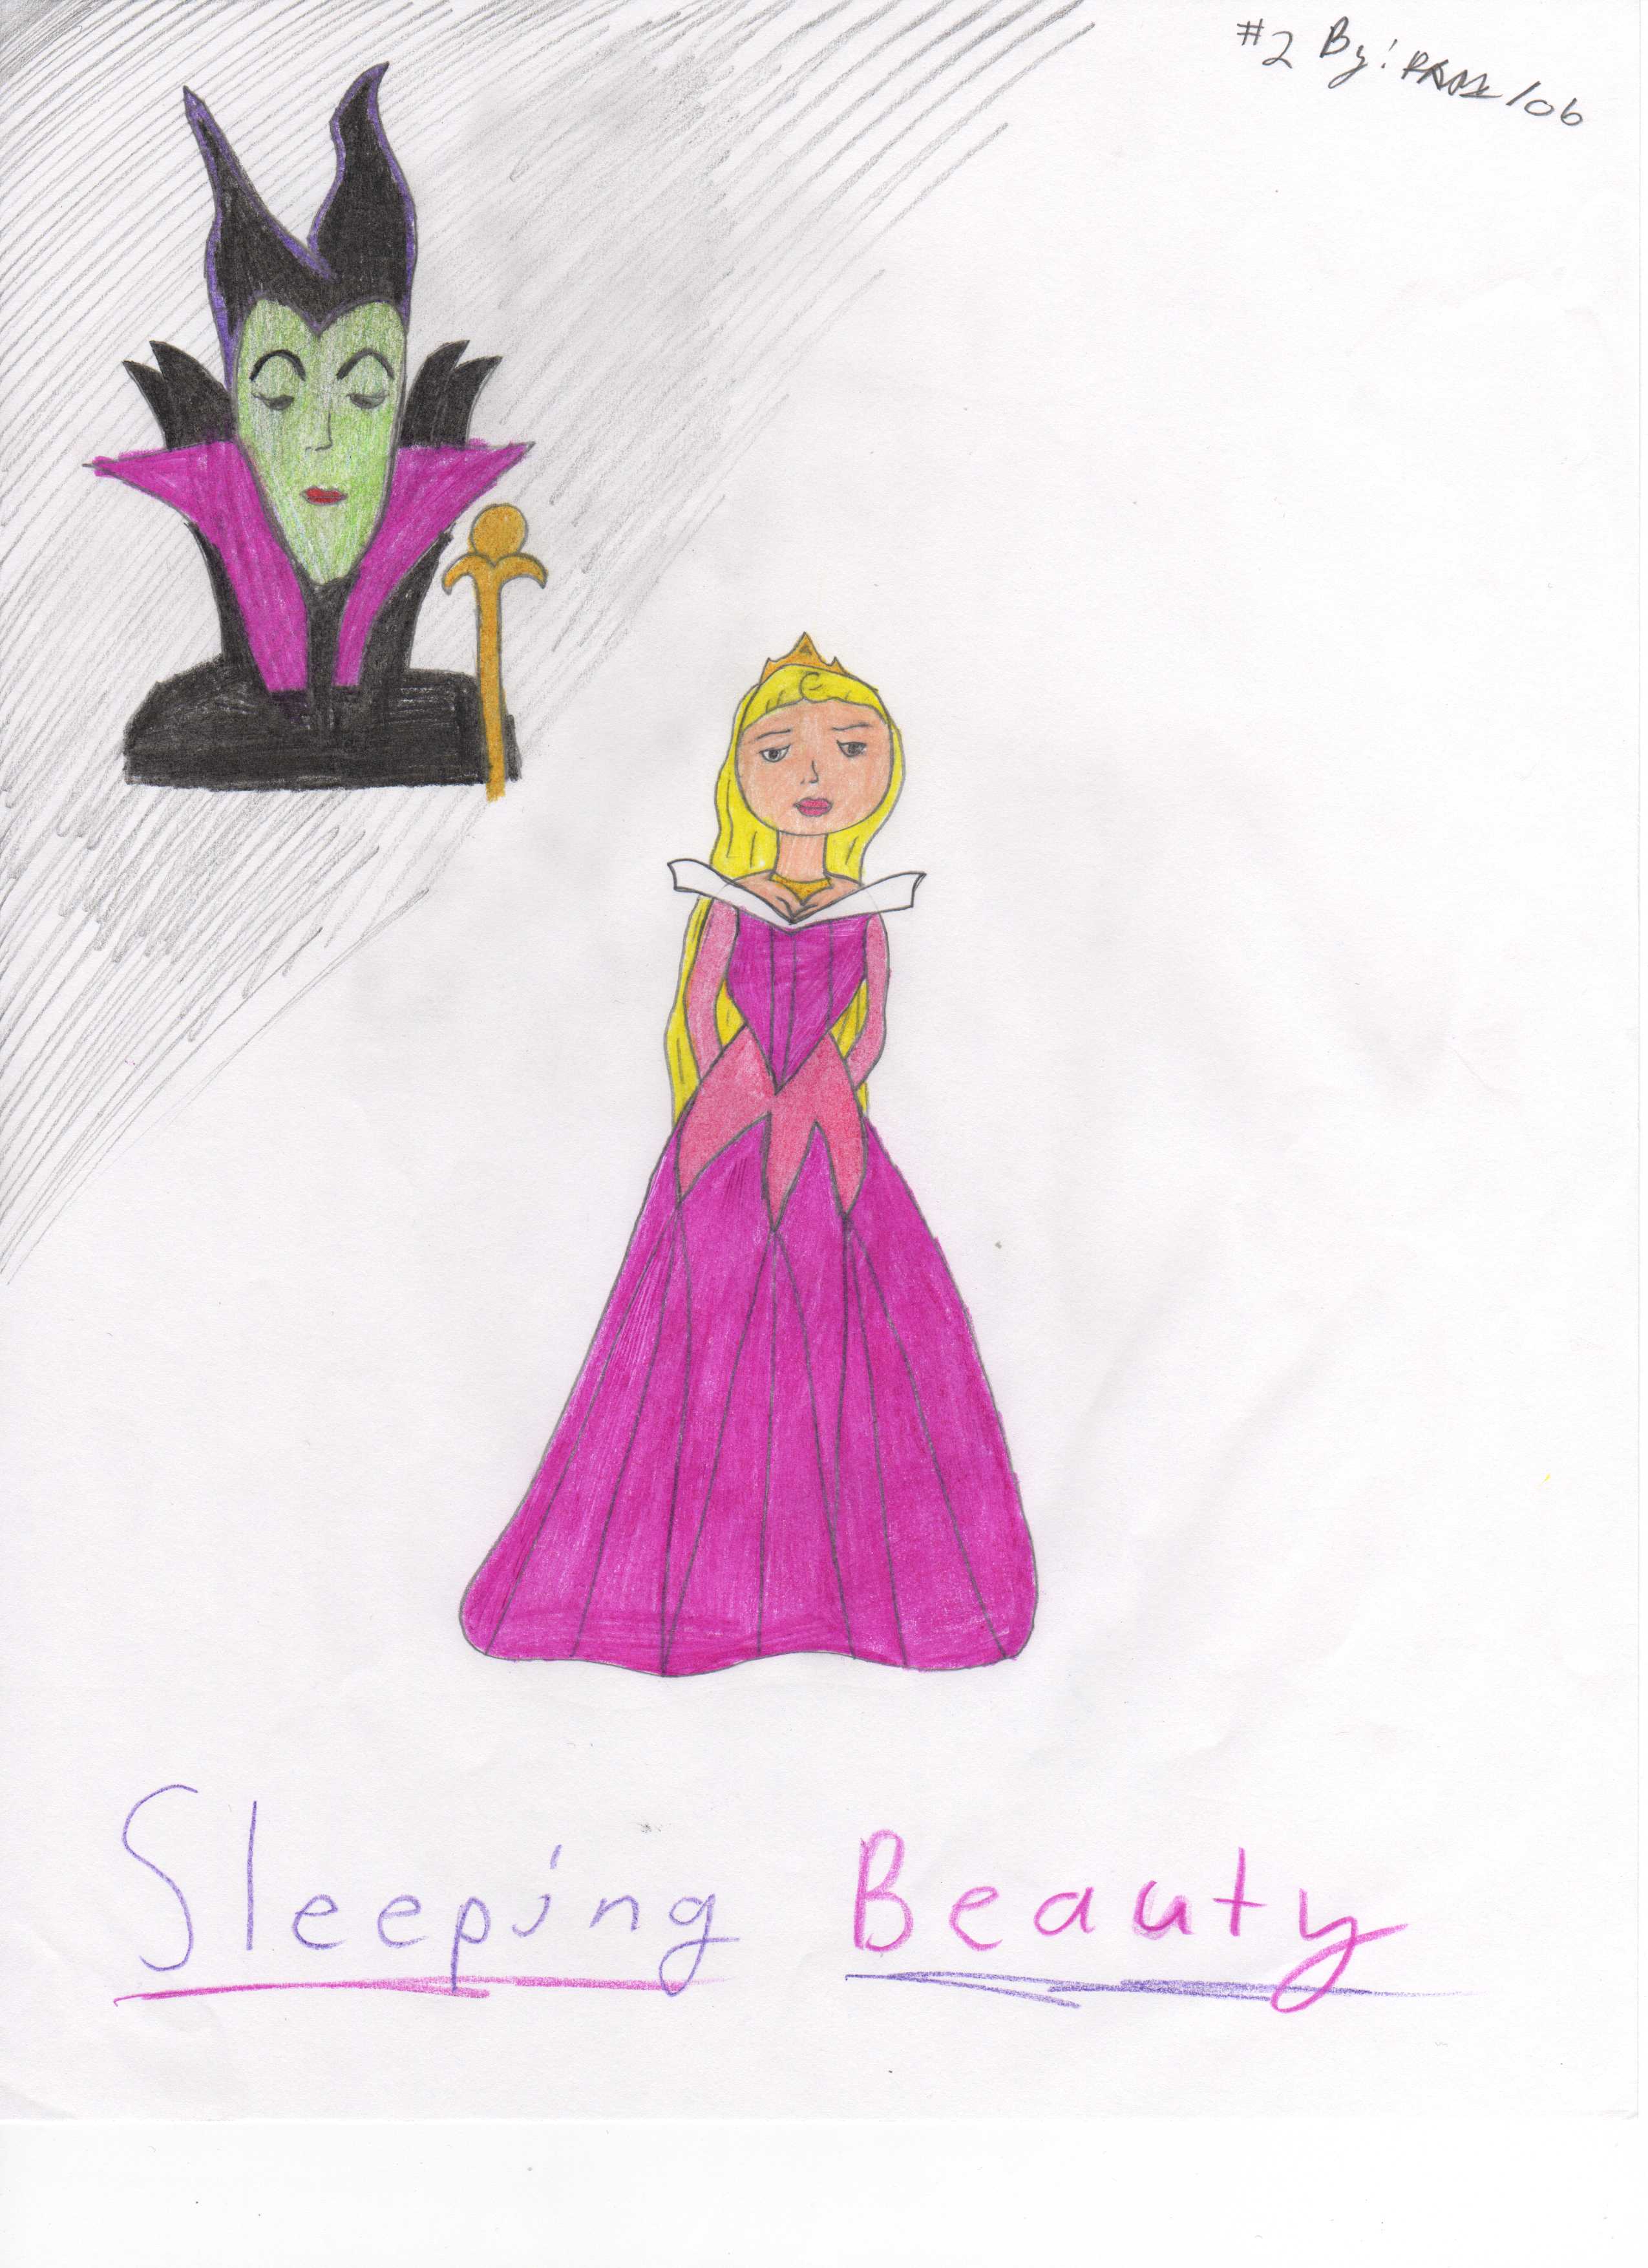 A sleeping Beauty by morticia13